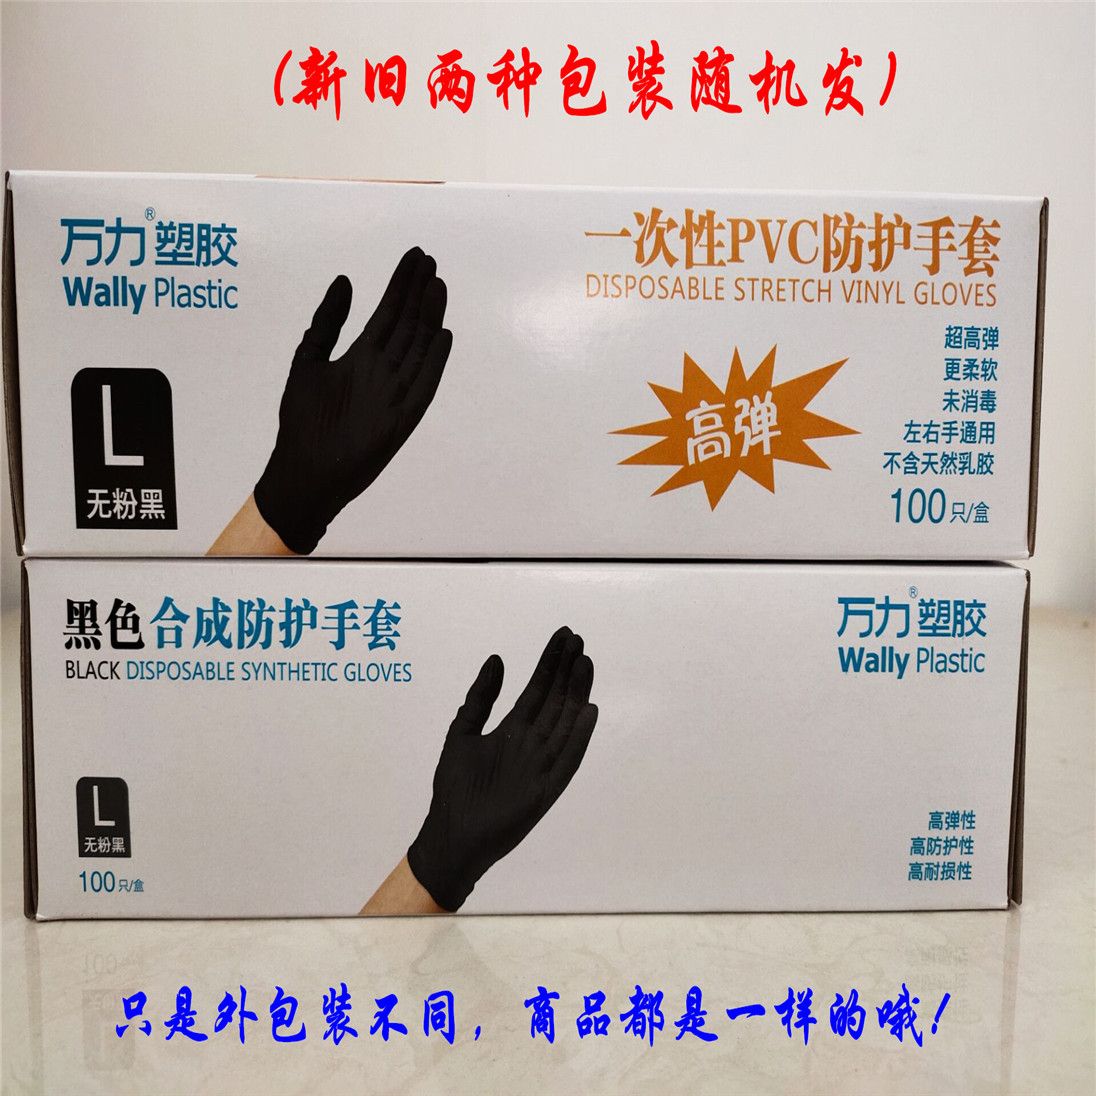 Wanli disposable high elastic gloves PVC new powder free black industrial protection waterproof antifouling beauty salon 100 pieces